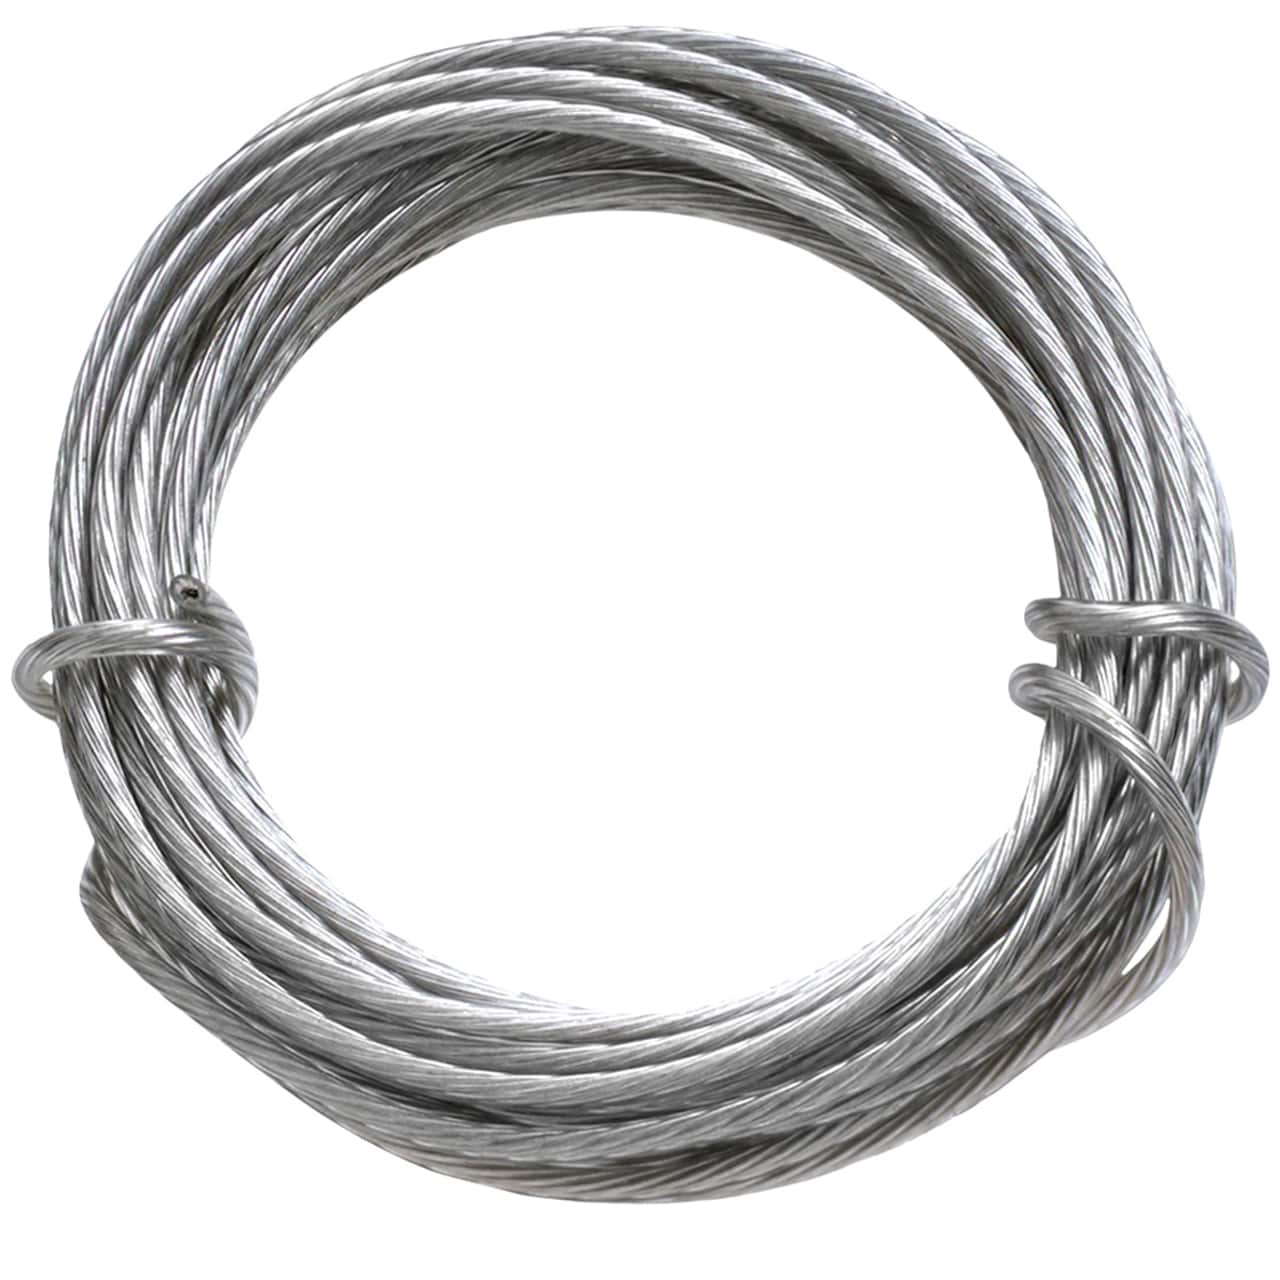 Professional Coated Picture Hanging Wire